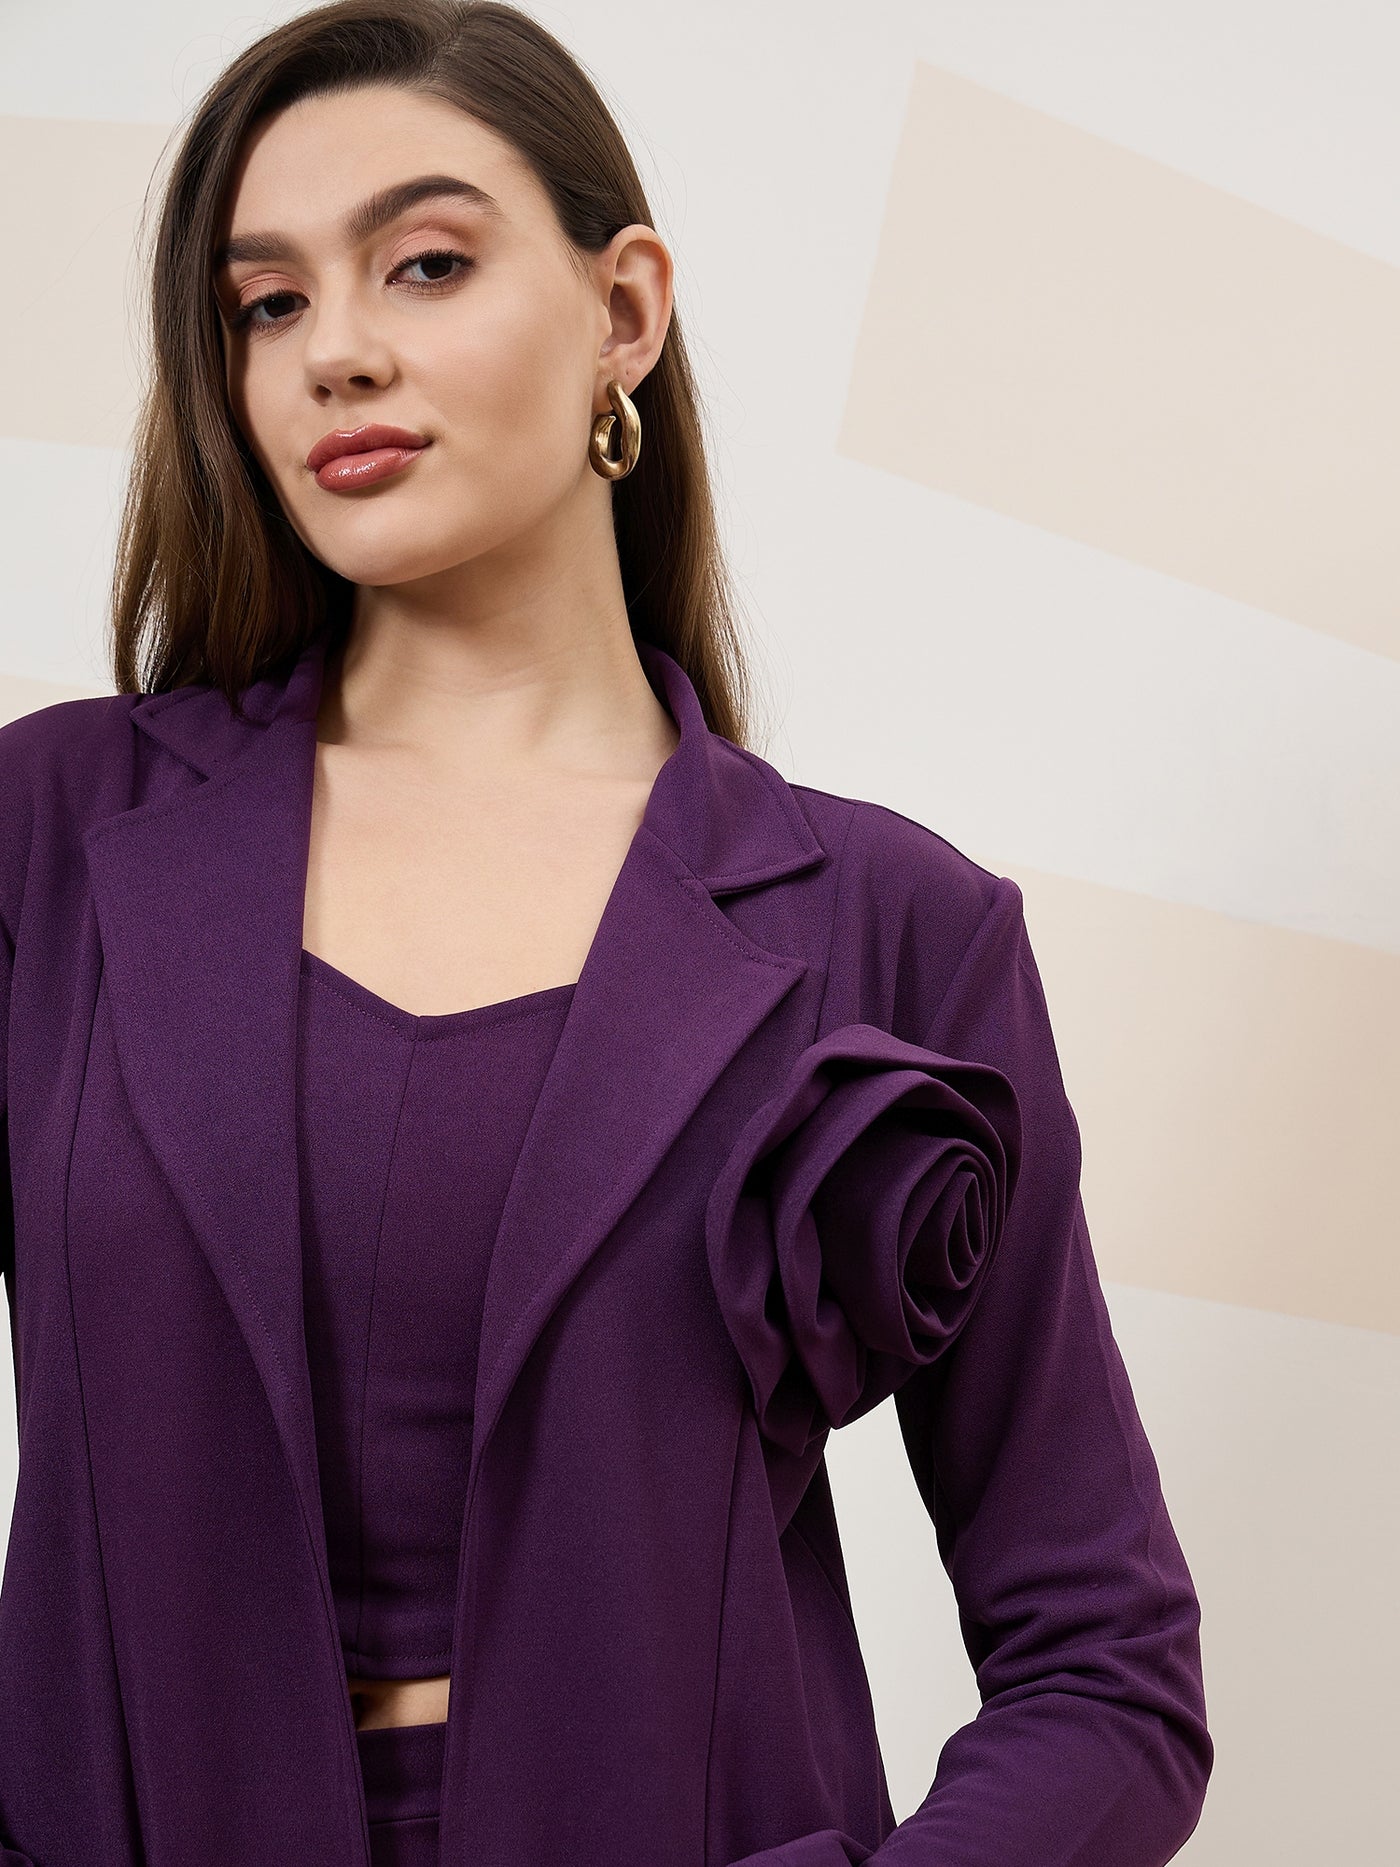 Shally Bhasin by Athena Blazer Top With Trousers Co-Ords